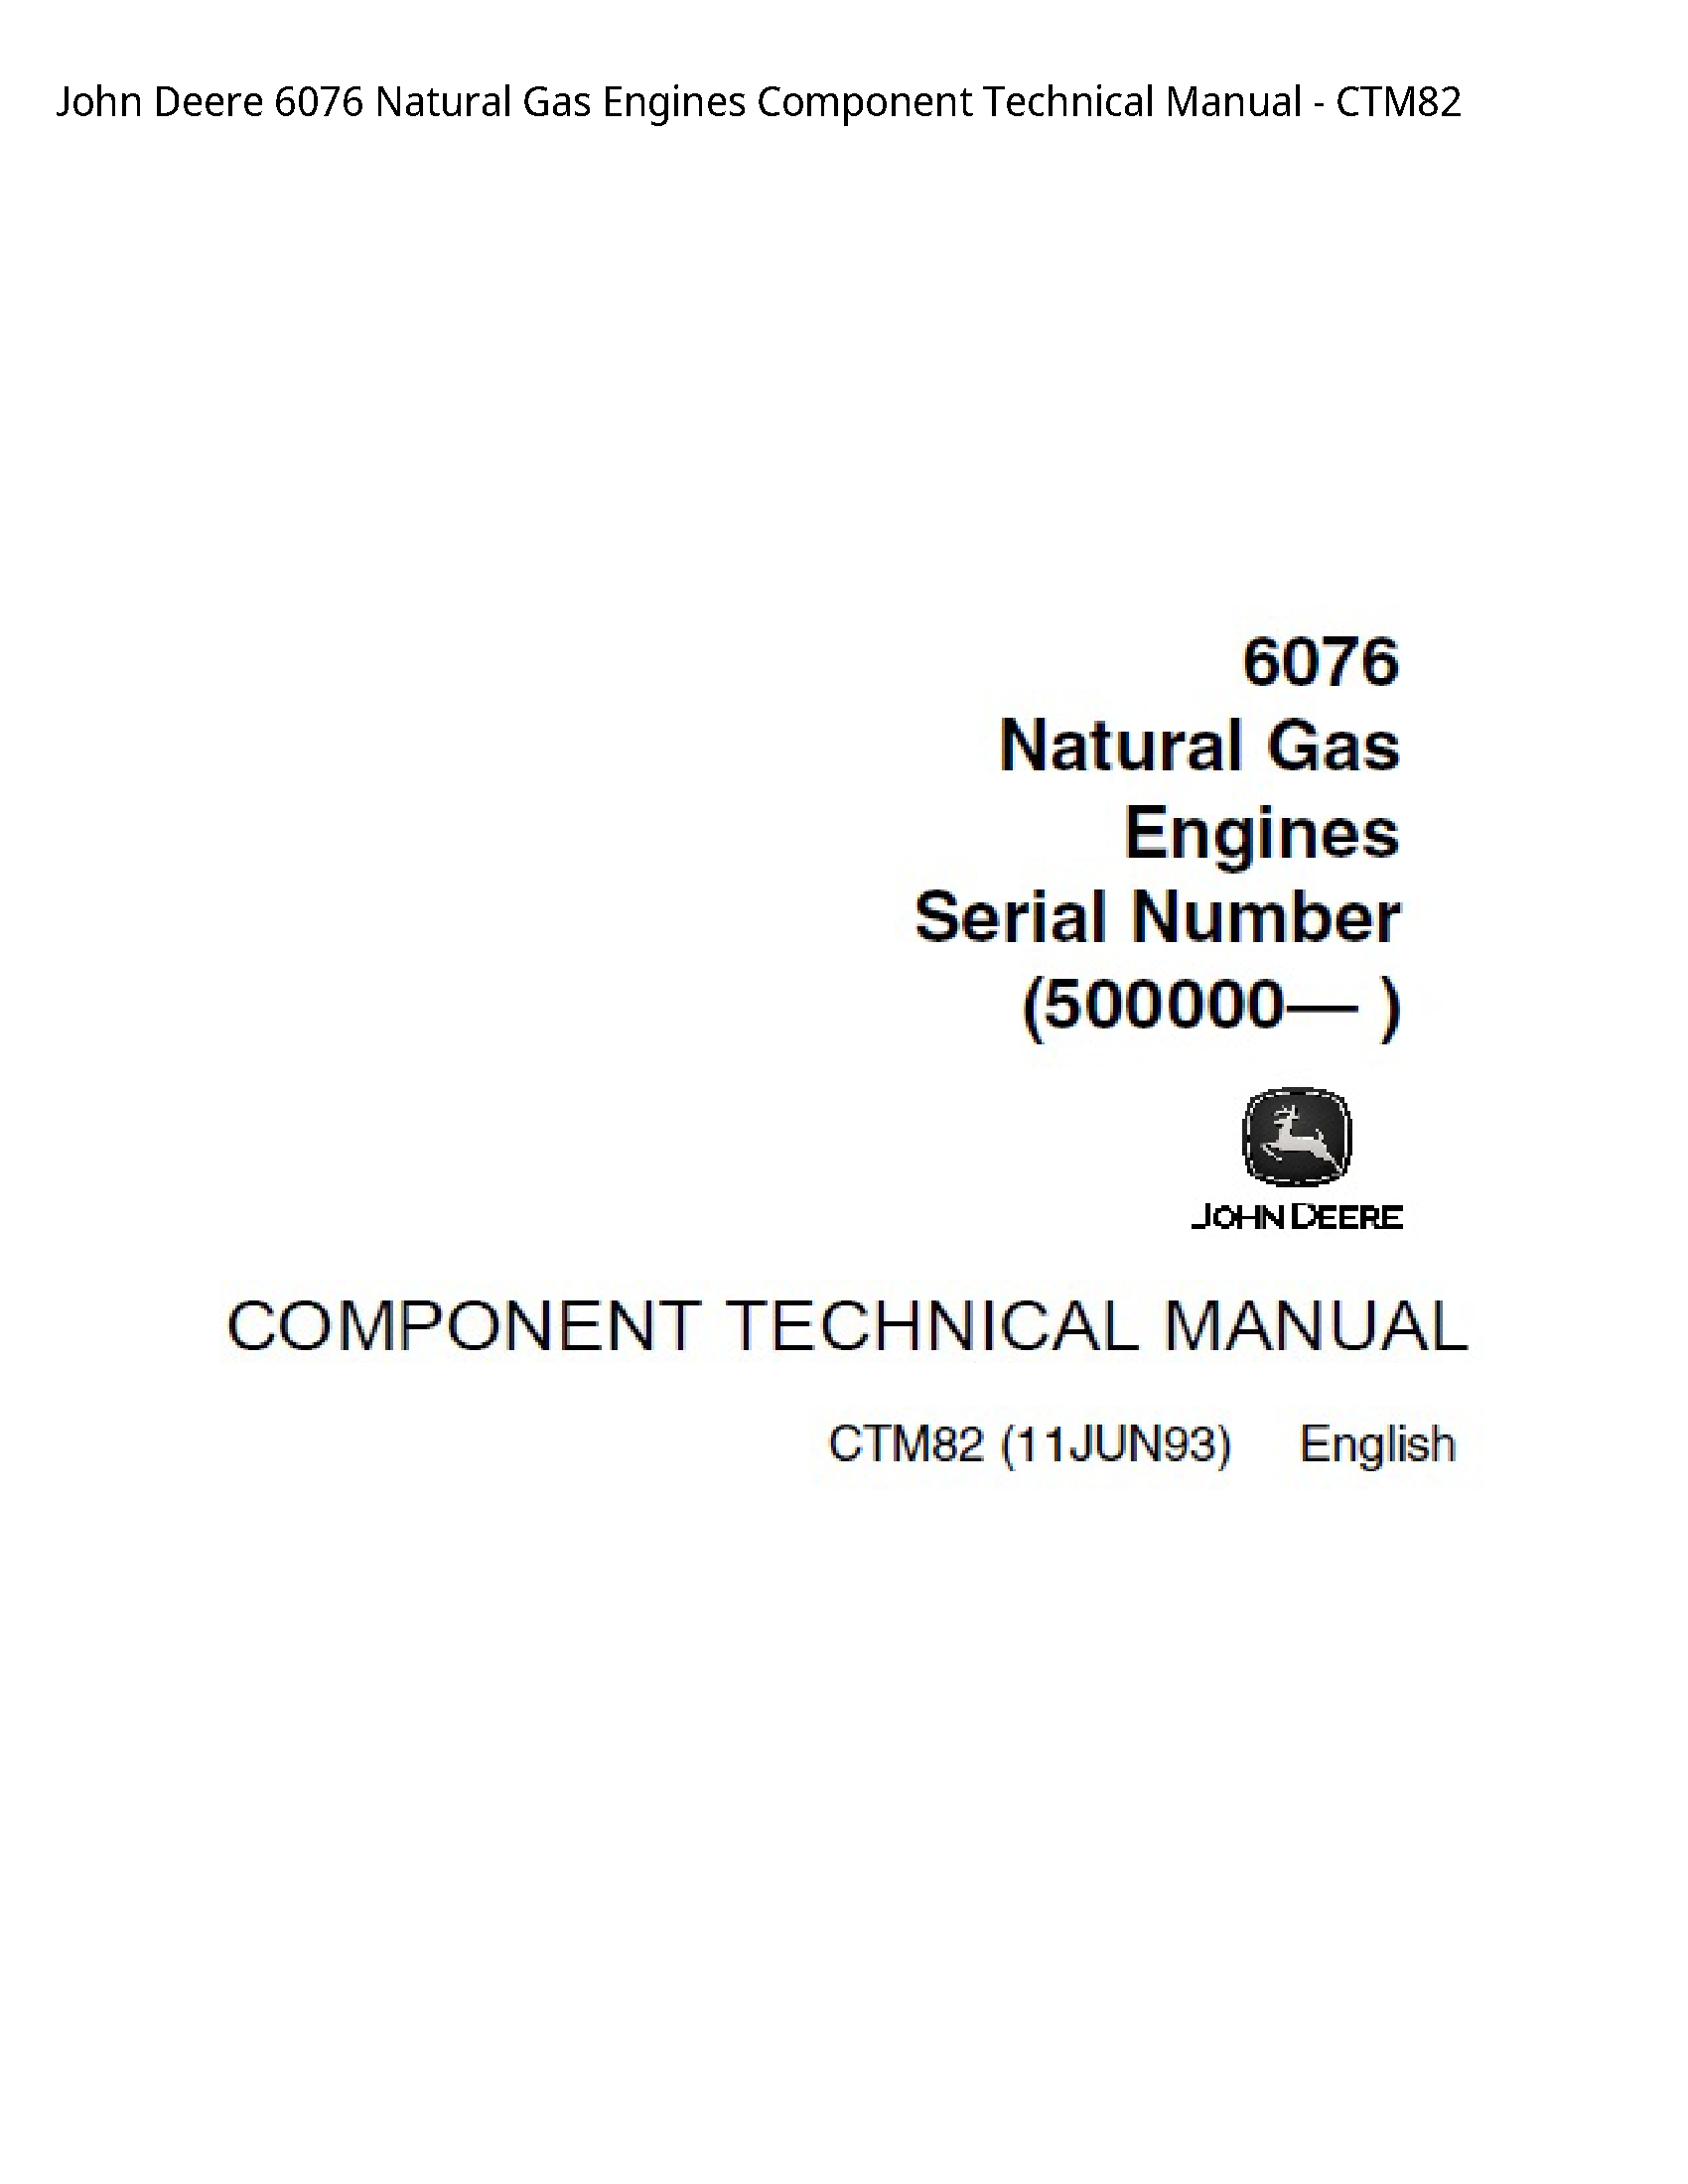 John Deere 6076 Natural Gas Engines Component Technical Manual - CTM82